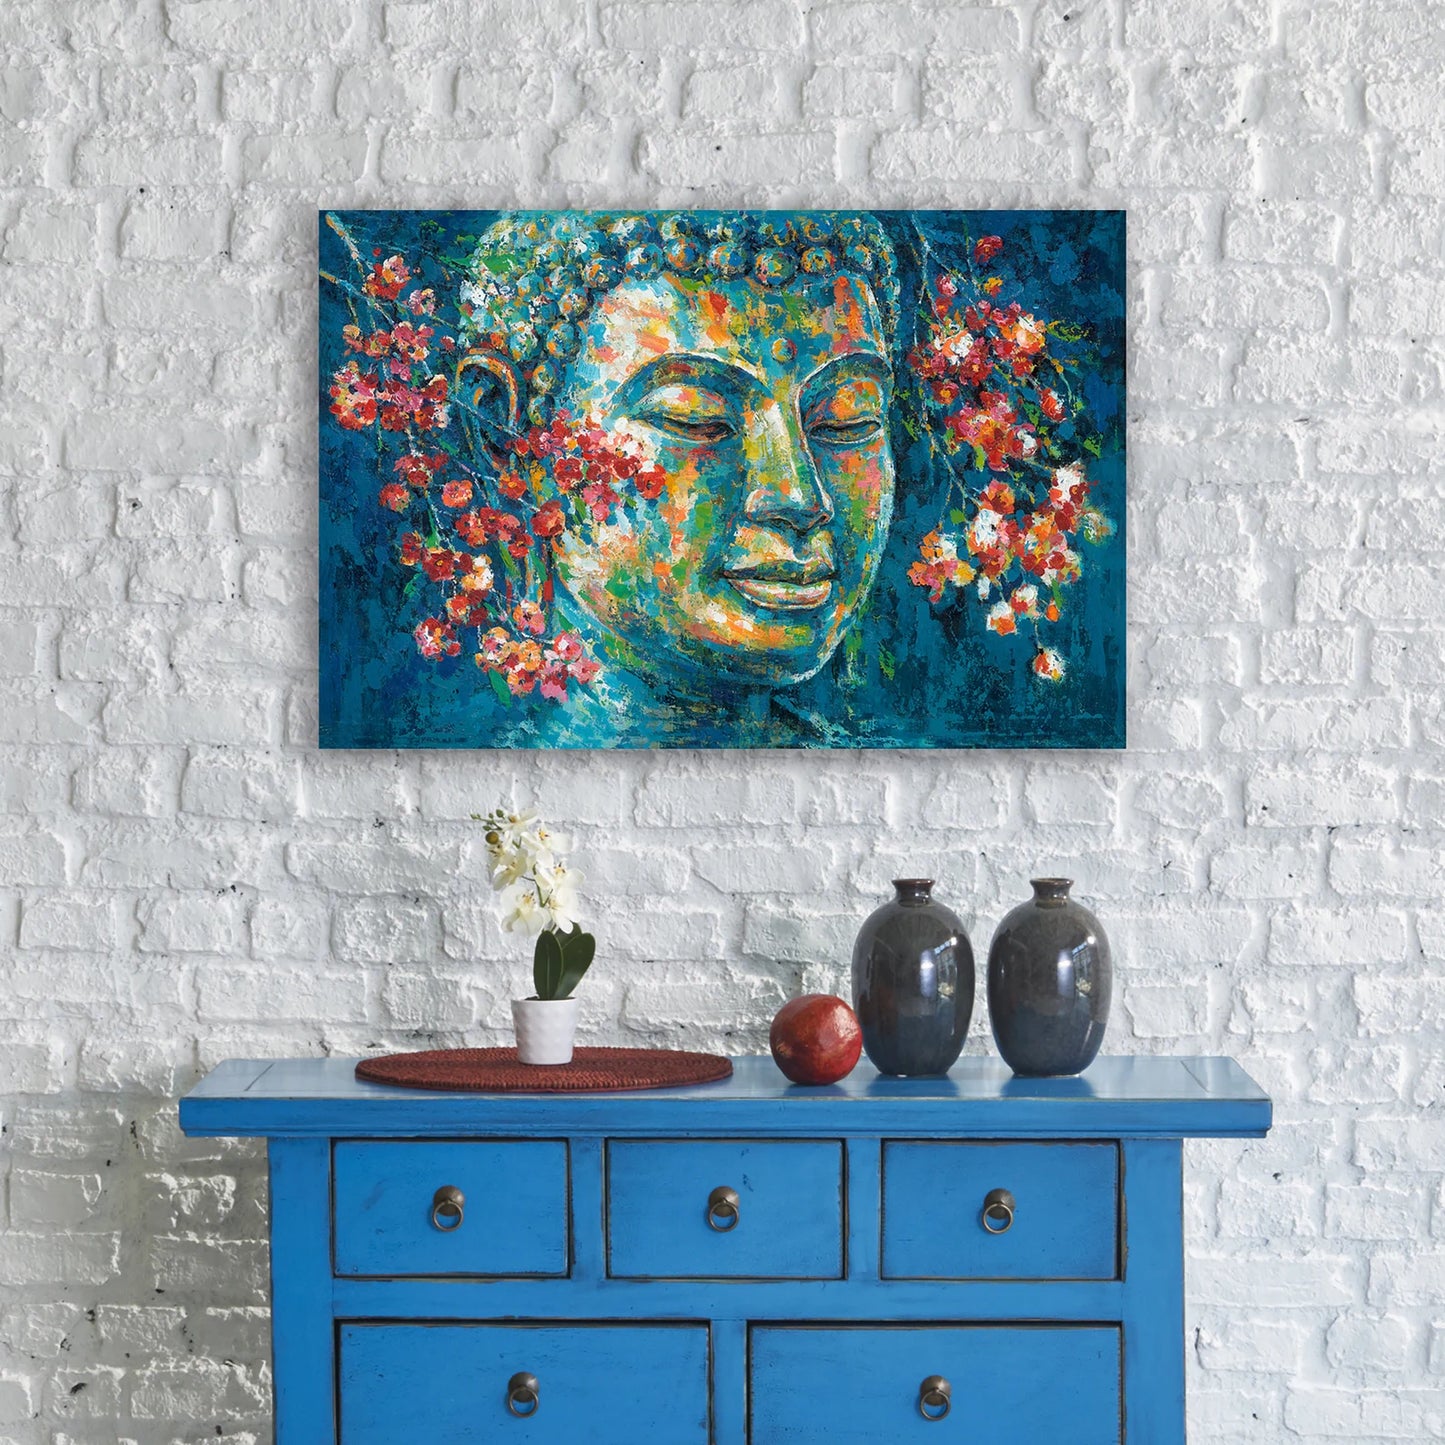 Original Design Art "Buddha's Blossoms" Oil Painting Prints | Canvas Wall Art for Living Room, Bedroom, Office | Wrapped Canvas Painting